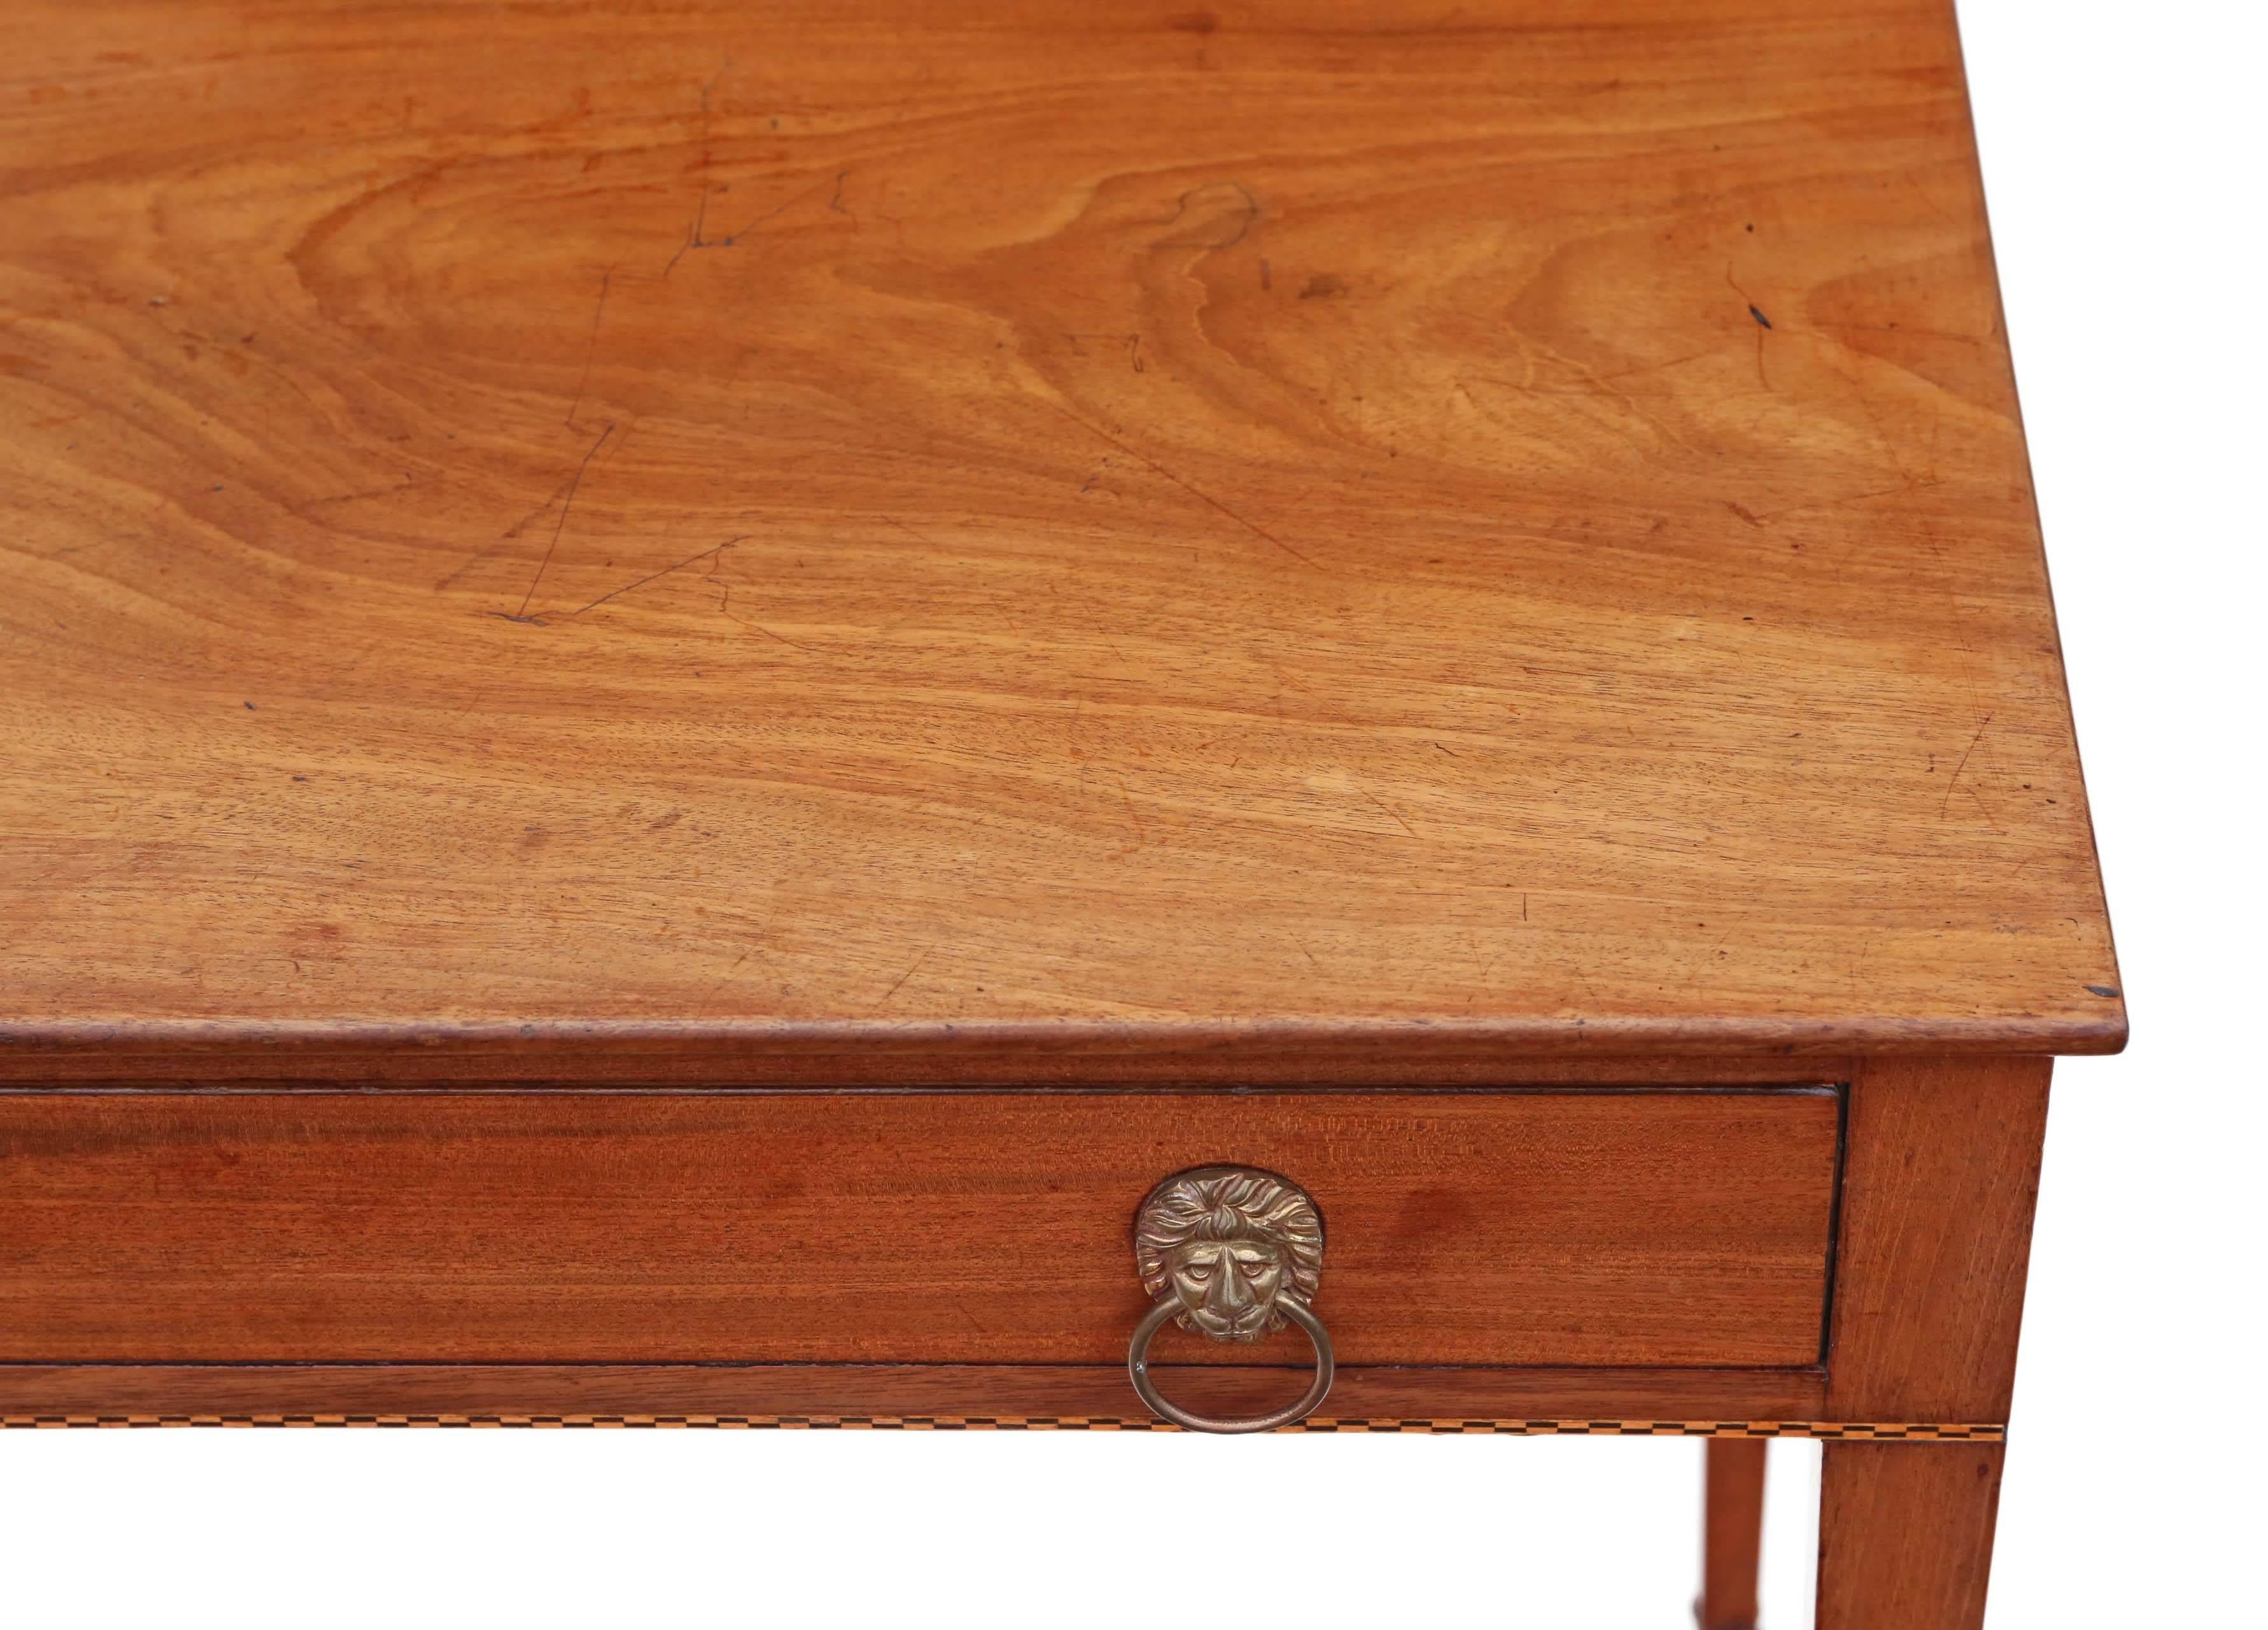 British Antique Victorian circa 1850 Inlaid Mahogany Writing Desk or Dressing Table For Sale